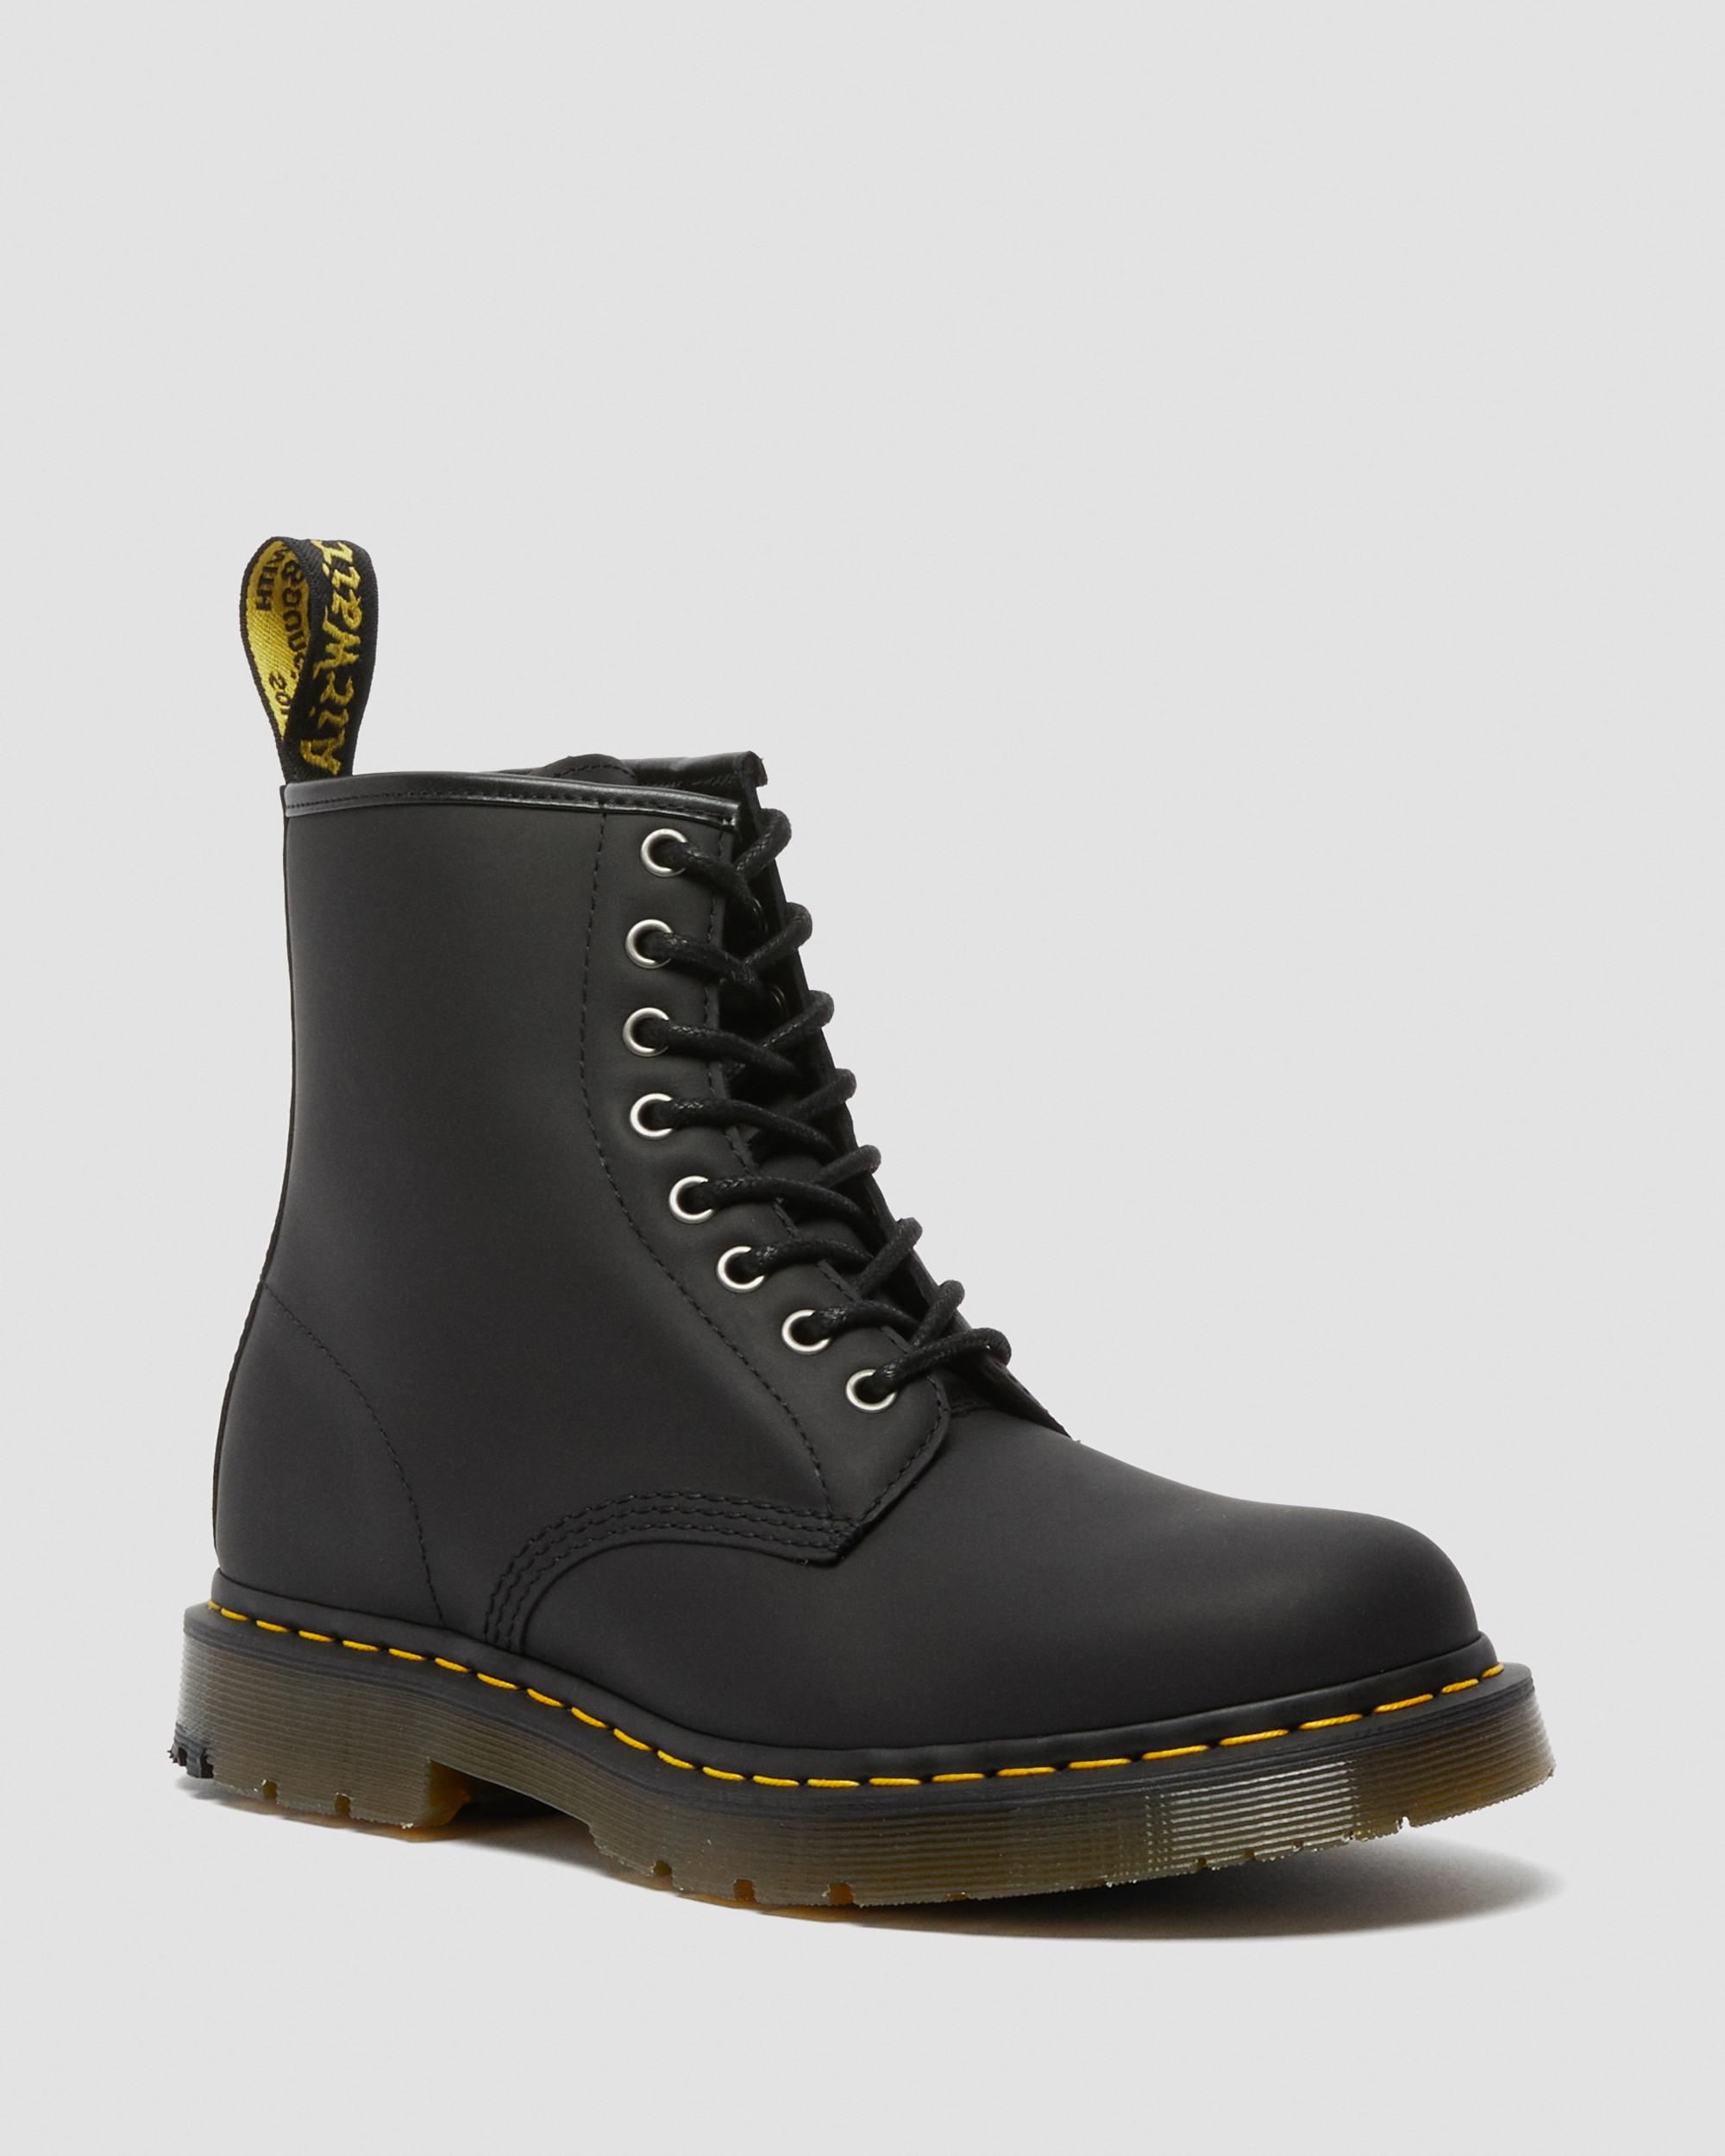 1460DM's Wintergrip Leather Ankle Boots in Black | Dr. Martens